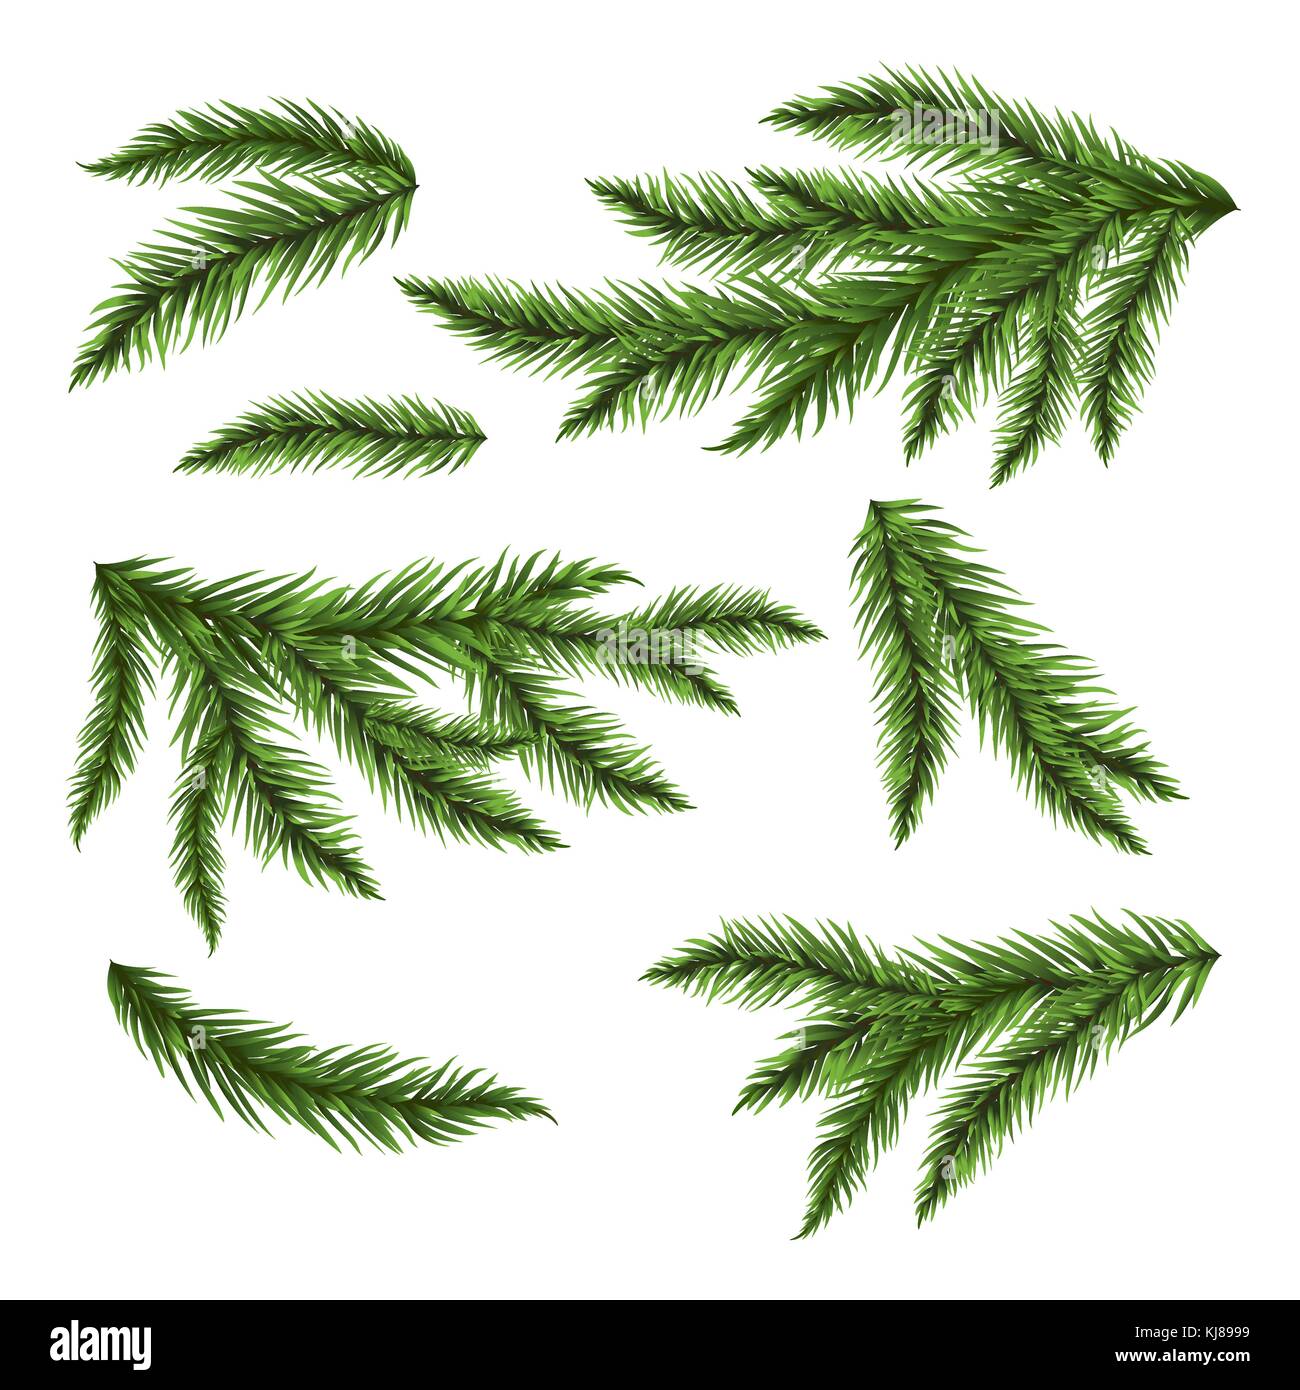 Pine tree branches isolated on white. Vector illustration. Stock Vector